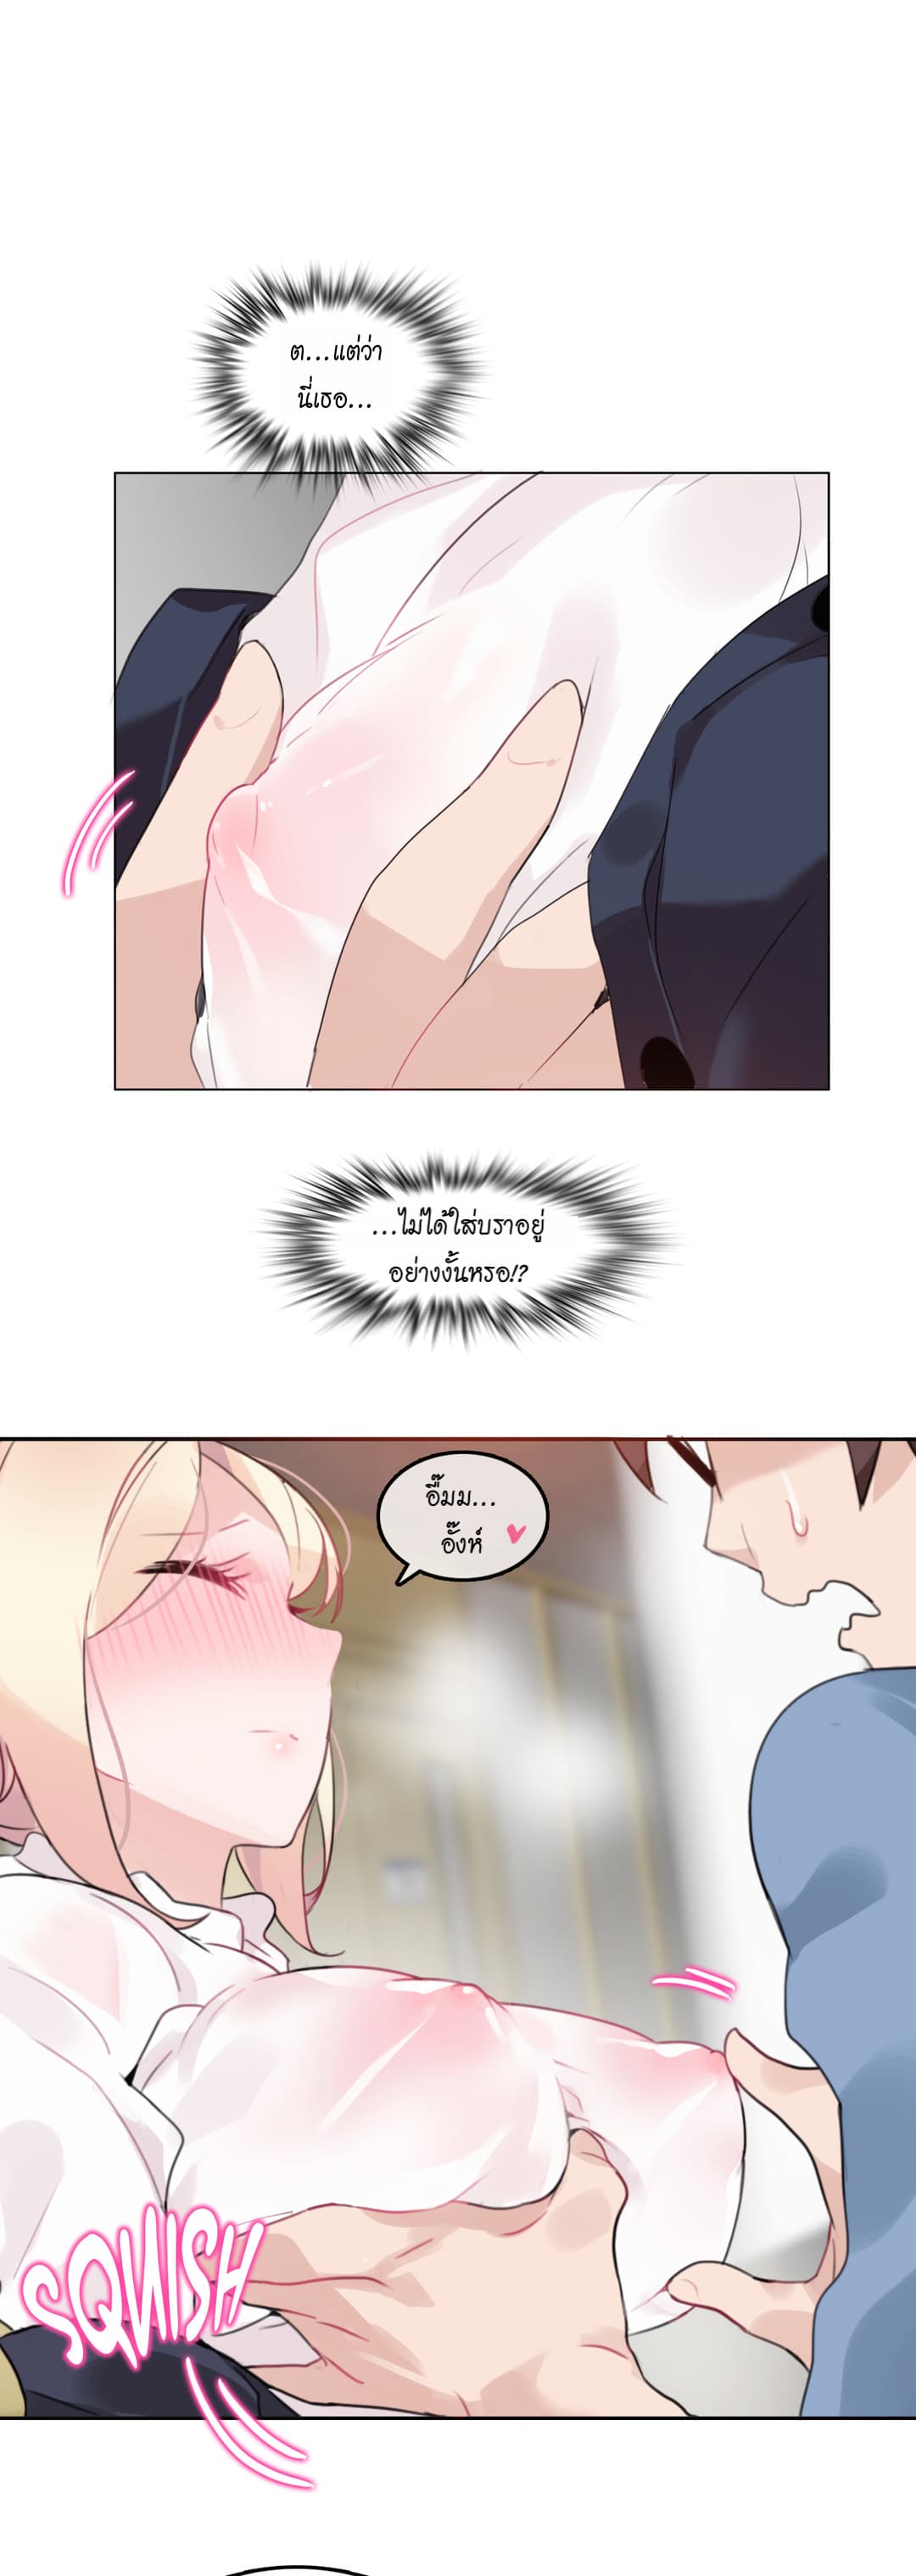 A Pervert’s Daily Life 24 (7)